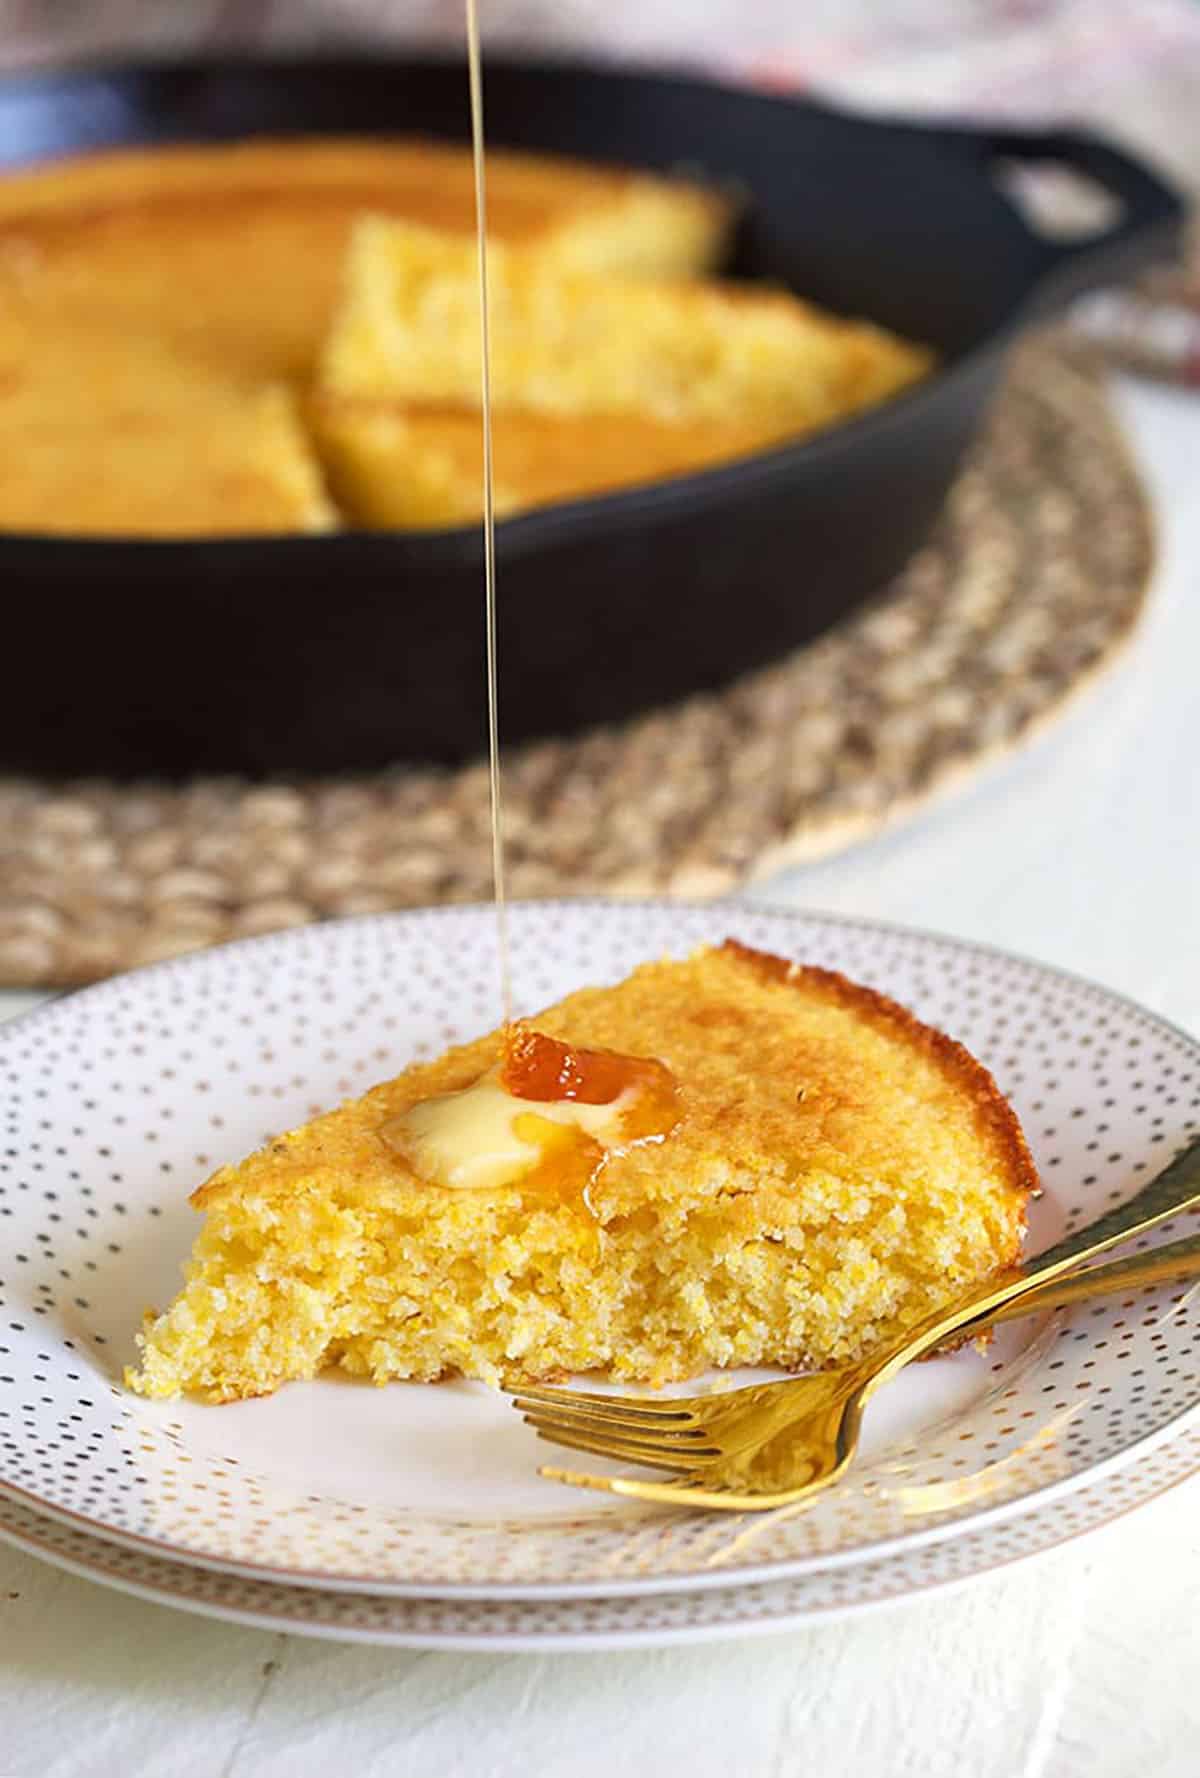 Honey is drizzled onto a piece of cornbread.